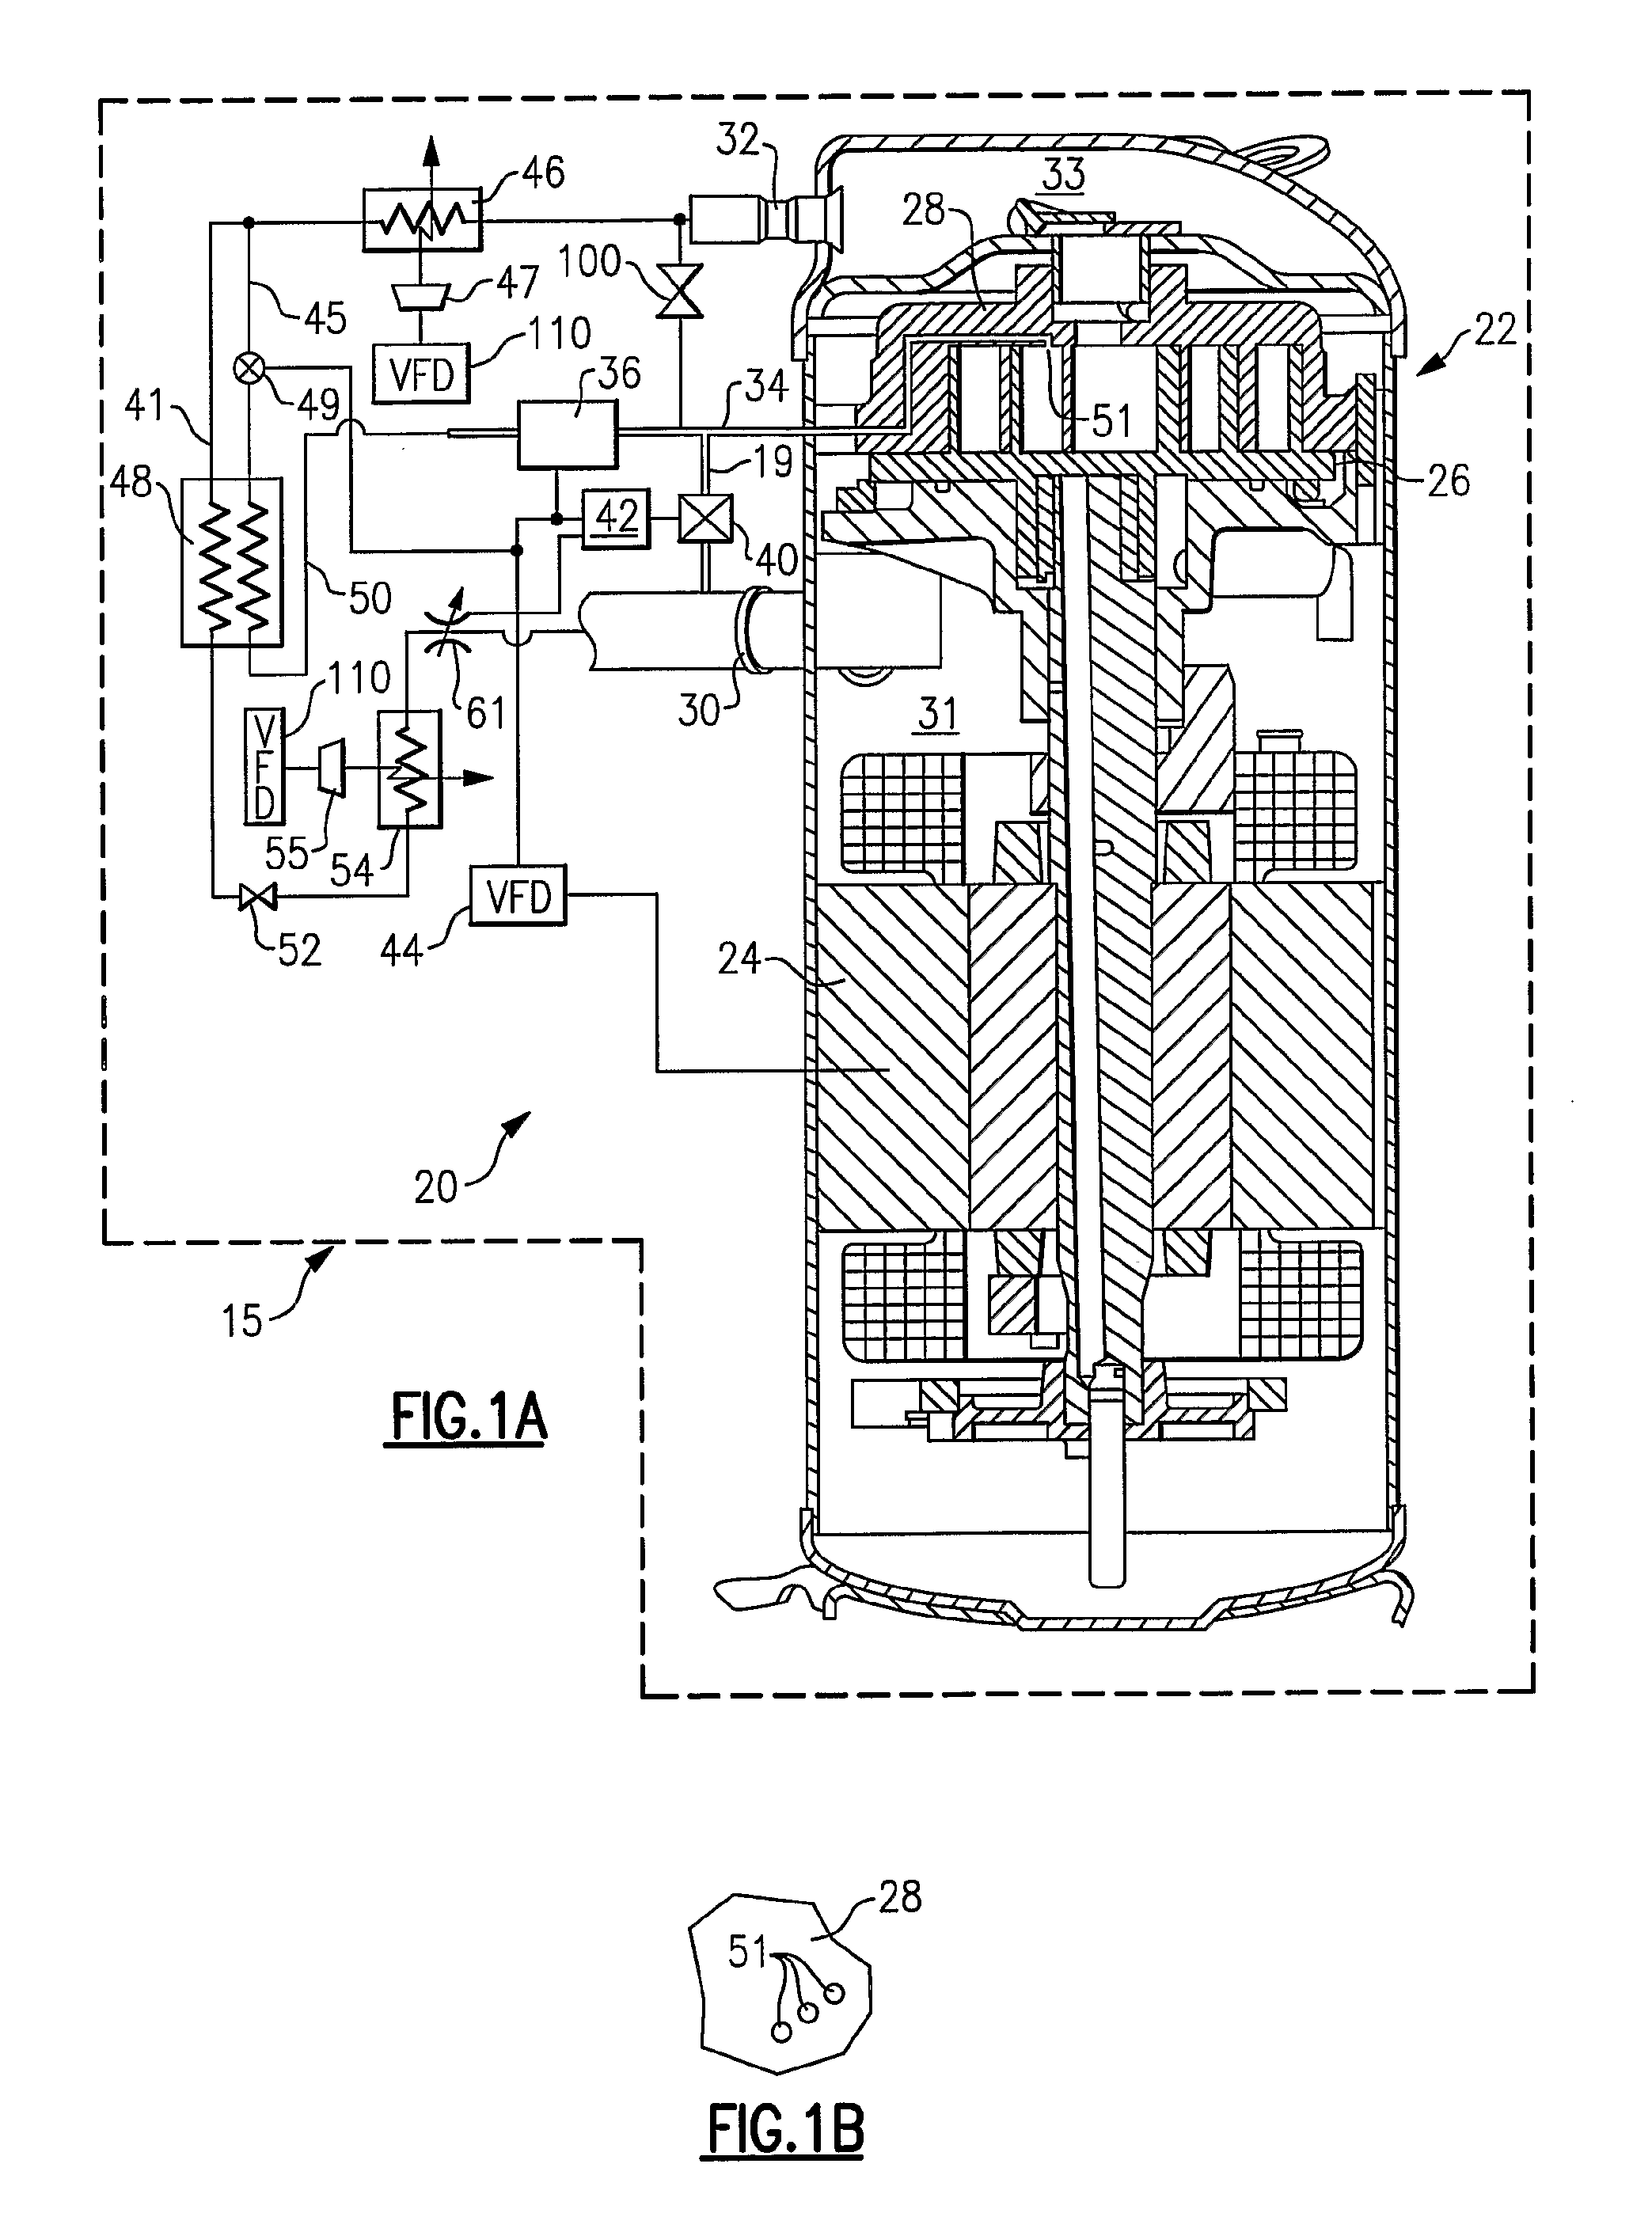 Refrigerant System With Variable Speed Scroll Compressor and Economizer Circuit